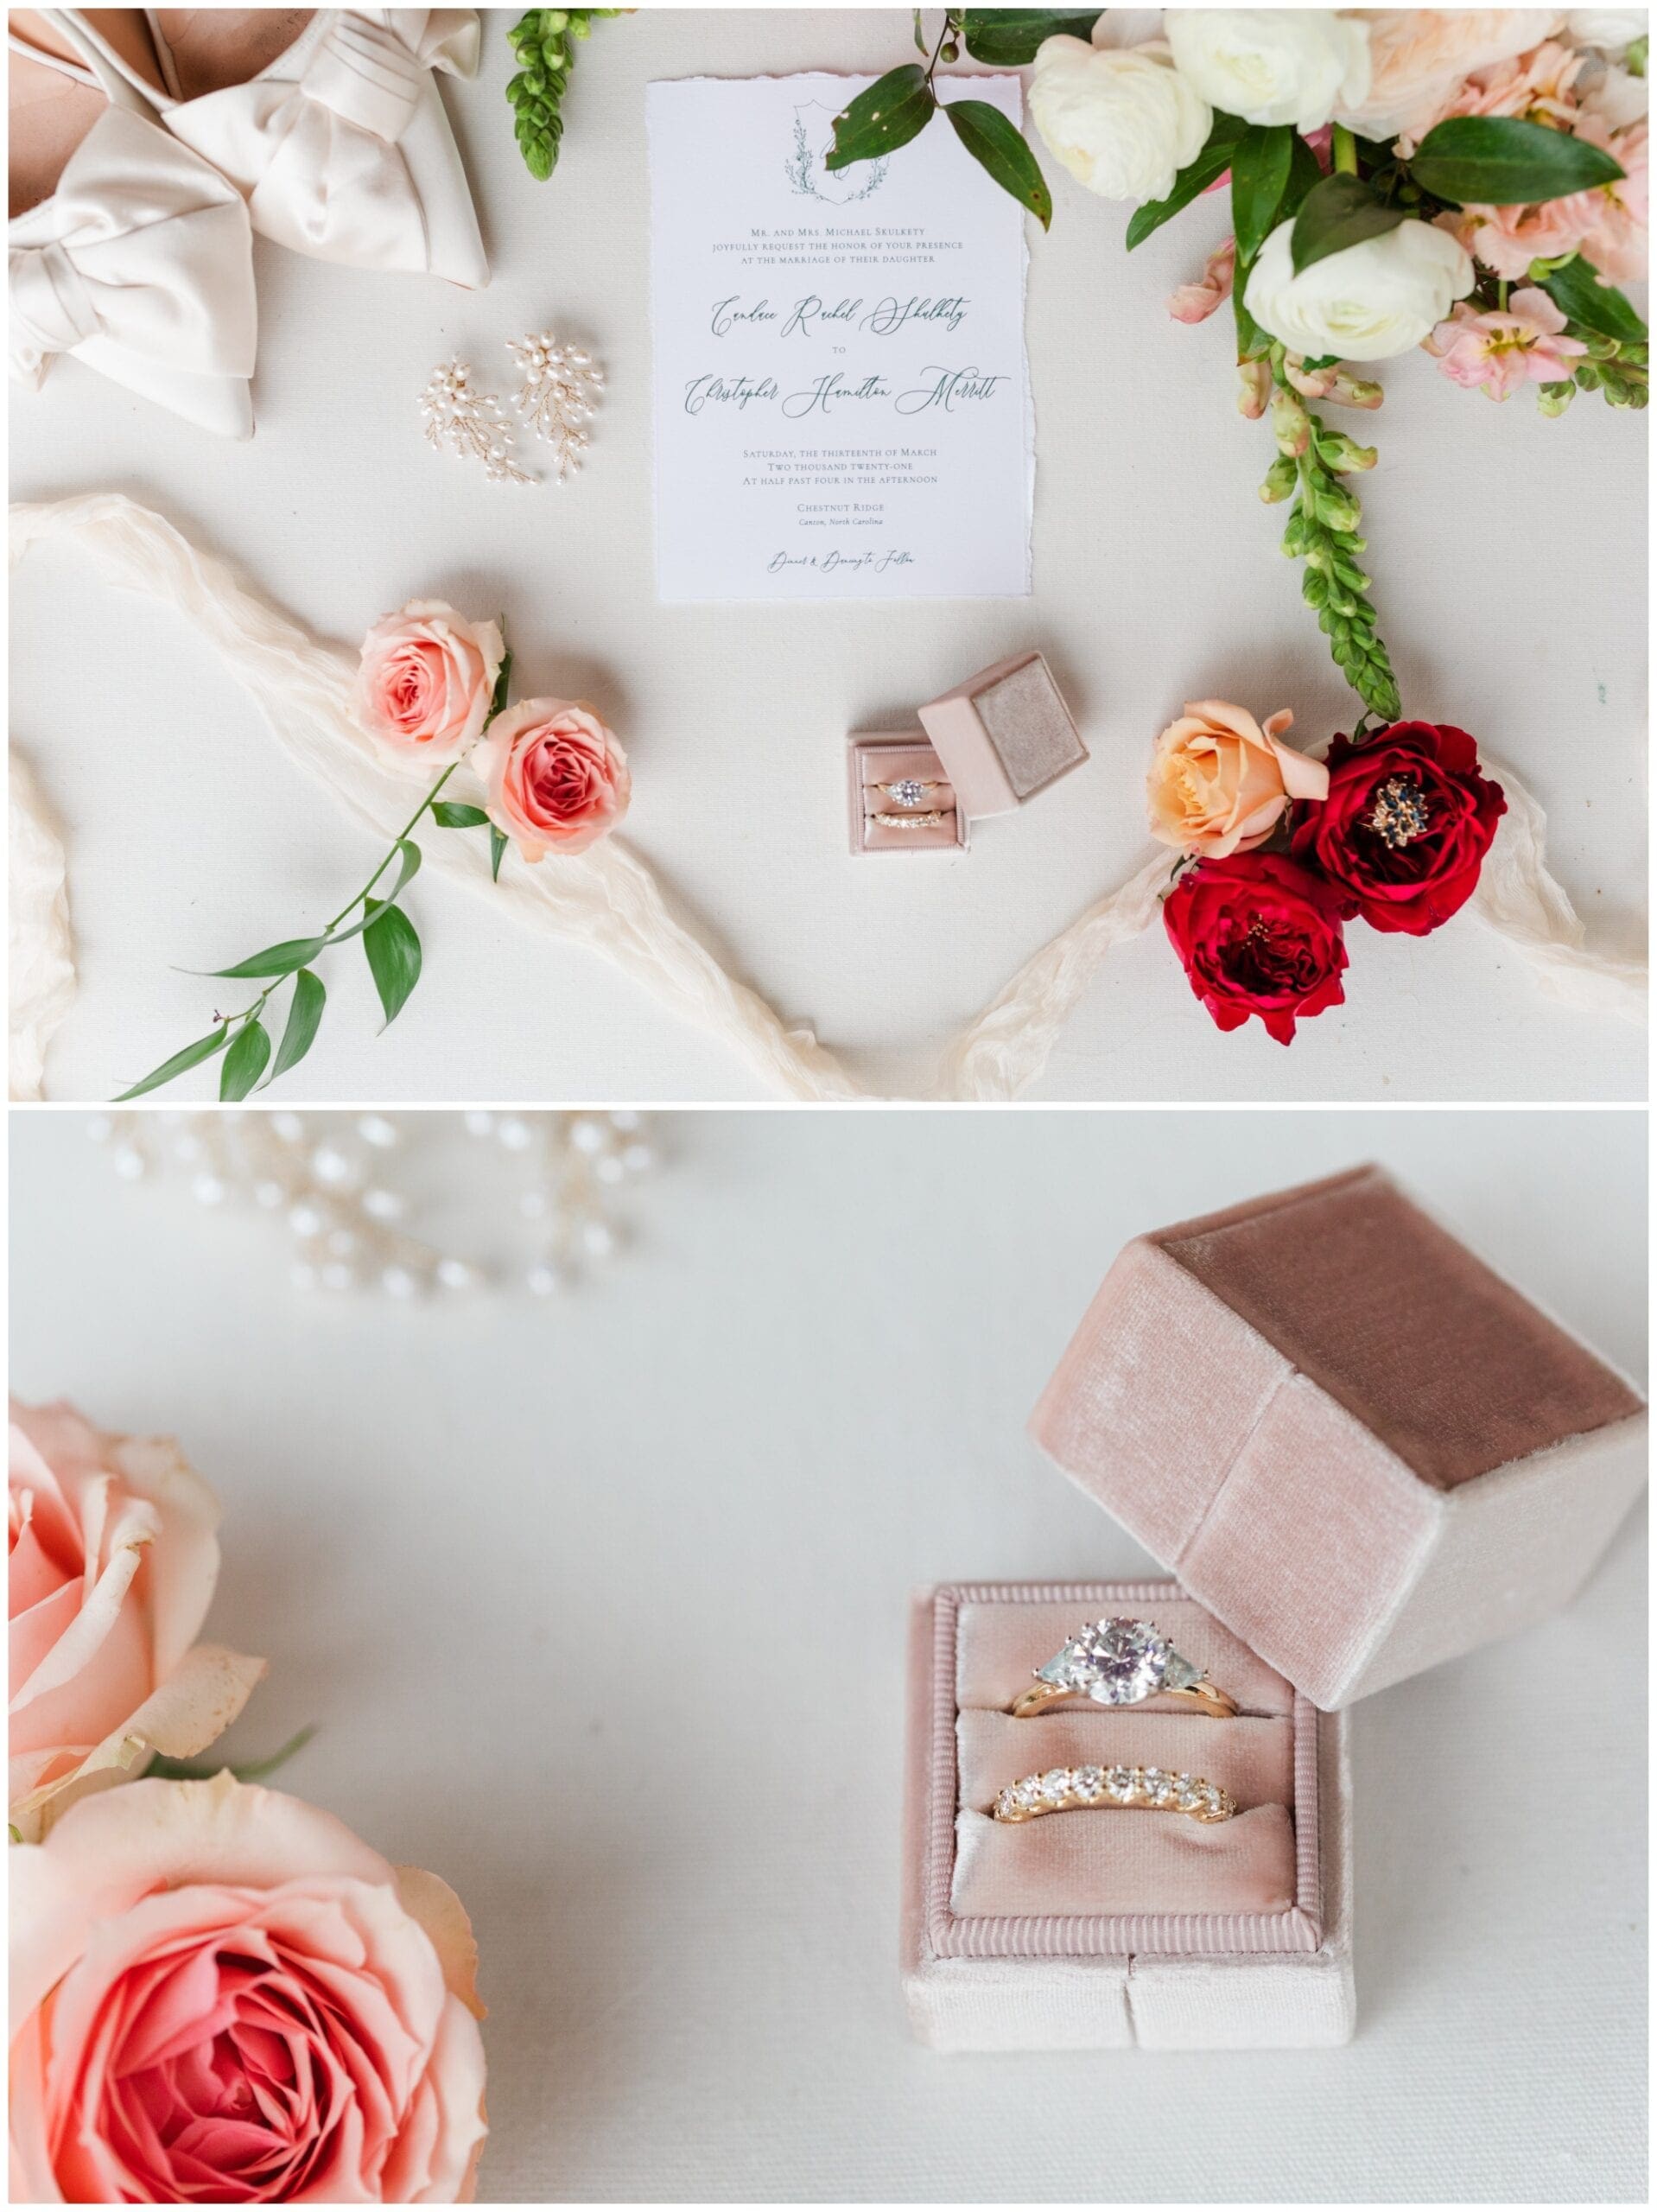 Ring and brides details with invitation photo